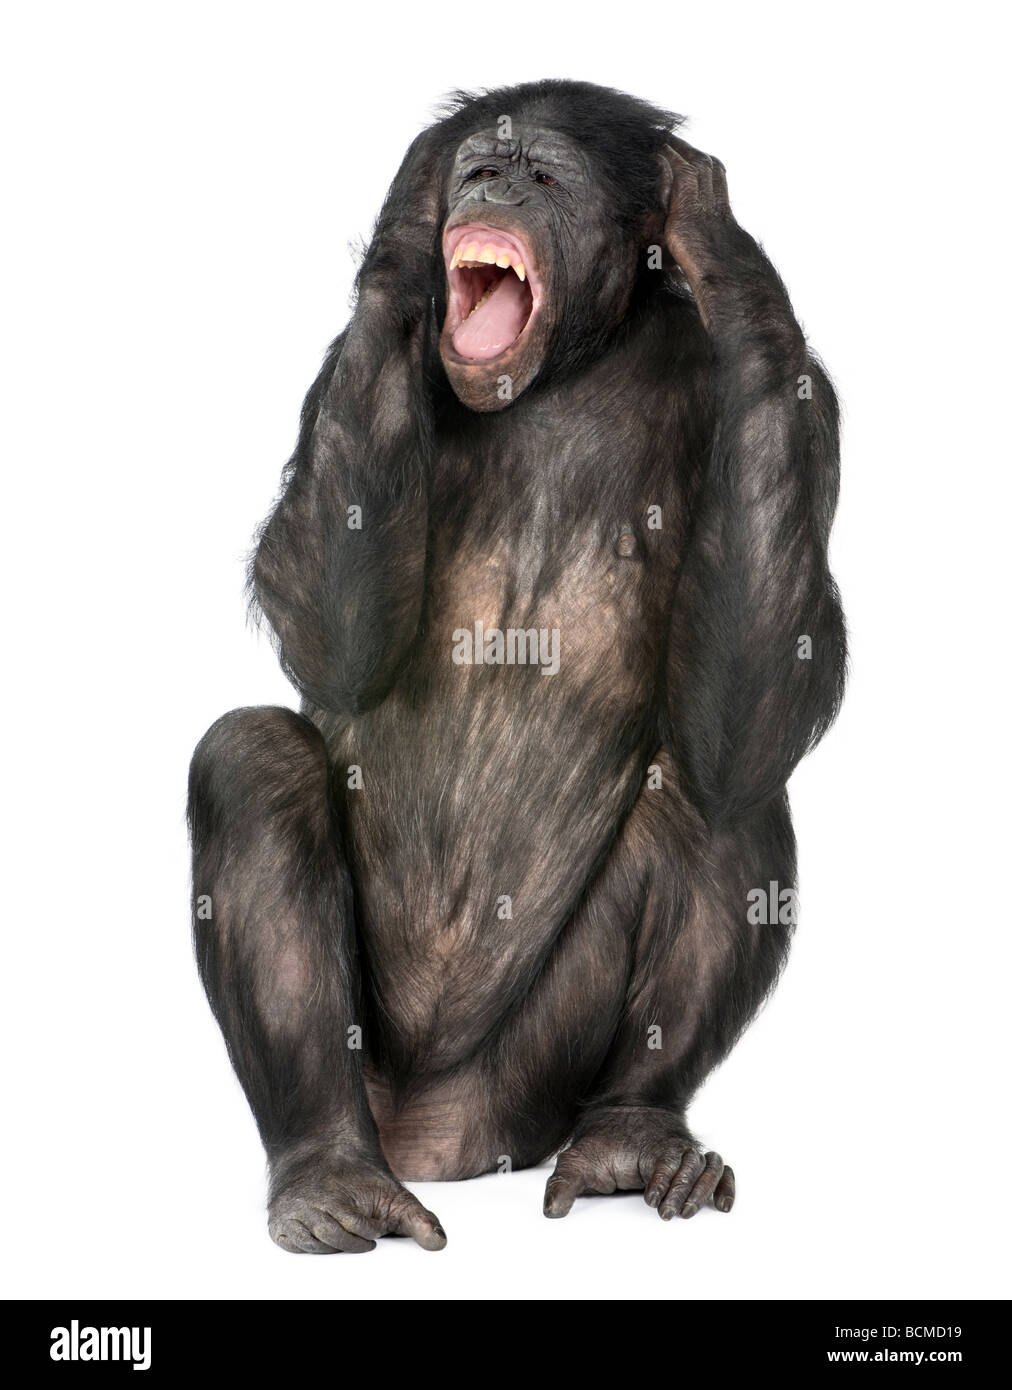 Cazy monkey screaming, Mixed Breed between Chimpanzee and Bonobo, 20 years old, in front of a white background Stock Photo